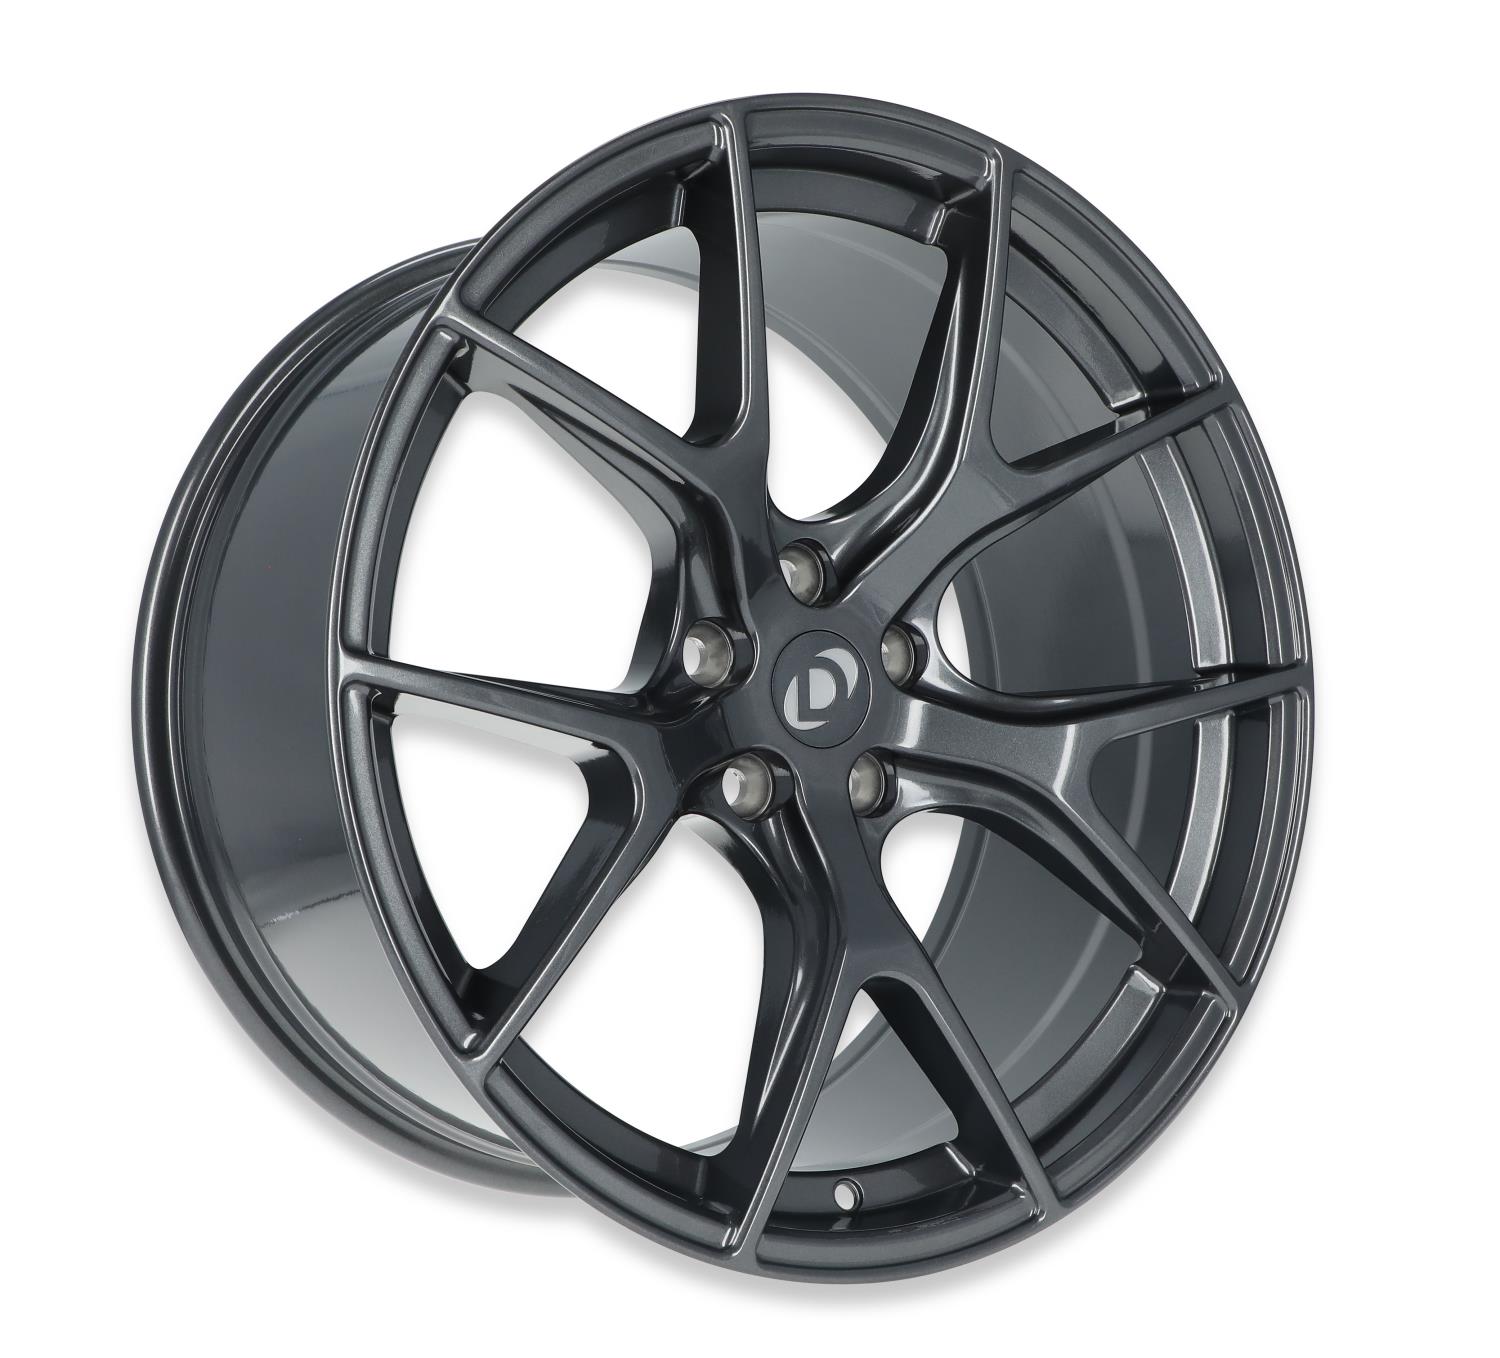 Dinan Hyper Kinetic Rear Wheel, Size: 20x10", Bolt Pattern: 5x120mm, Backspace: 7.04" [Anthracite Finish with Clearcoat]